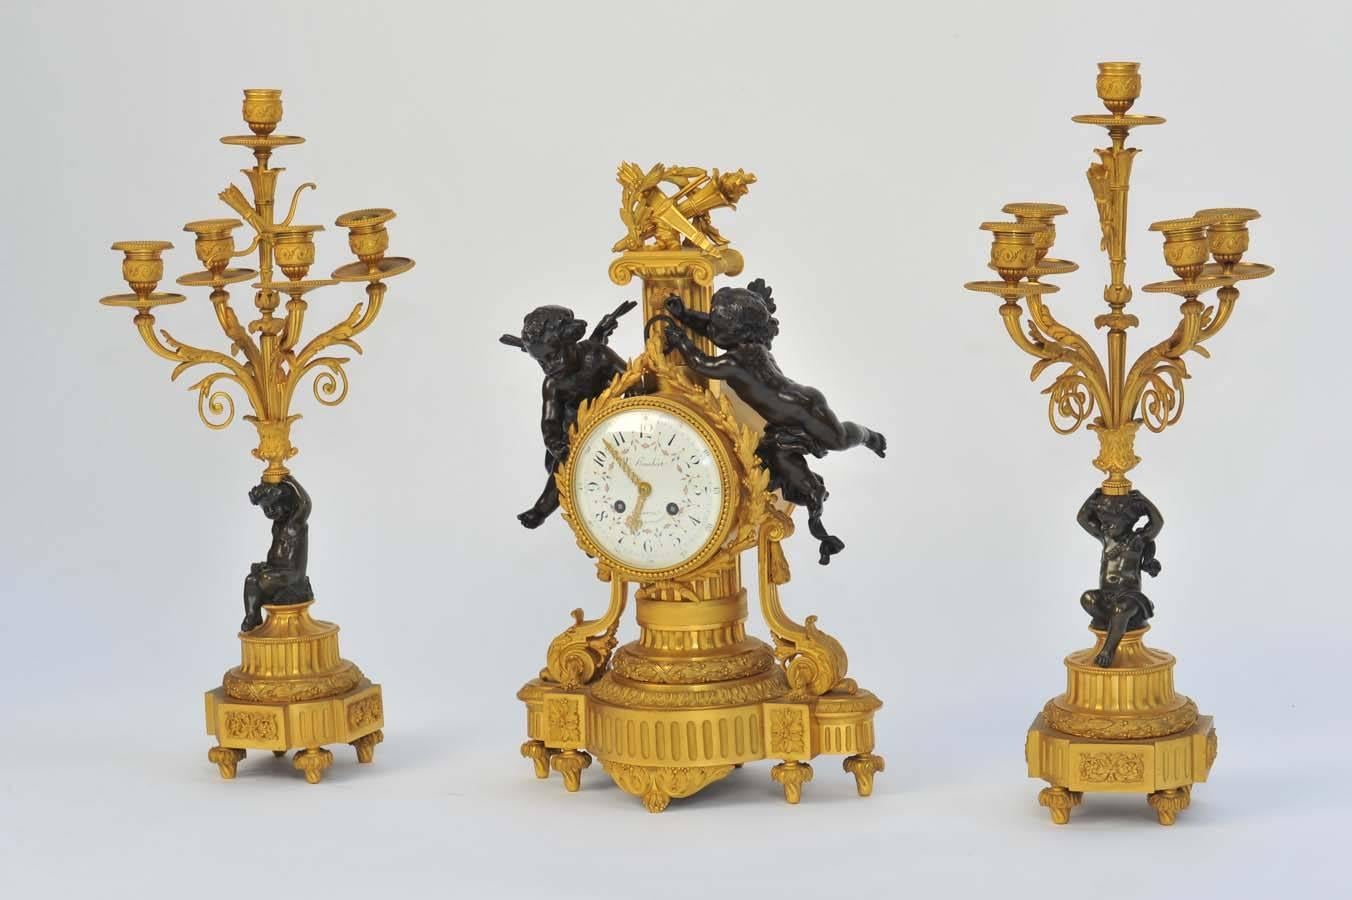 A good quality French bronze and ormolu clock garniture, having bronze cherubs mounted either side of the clock and supporting the five branch candelabra. 
Retailer; Humbert.